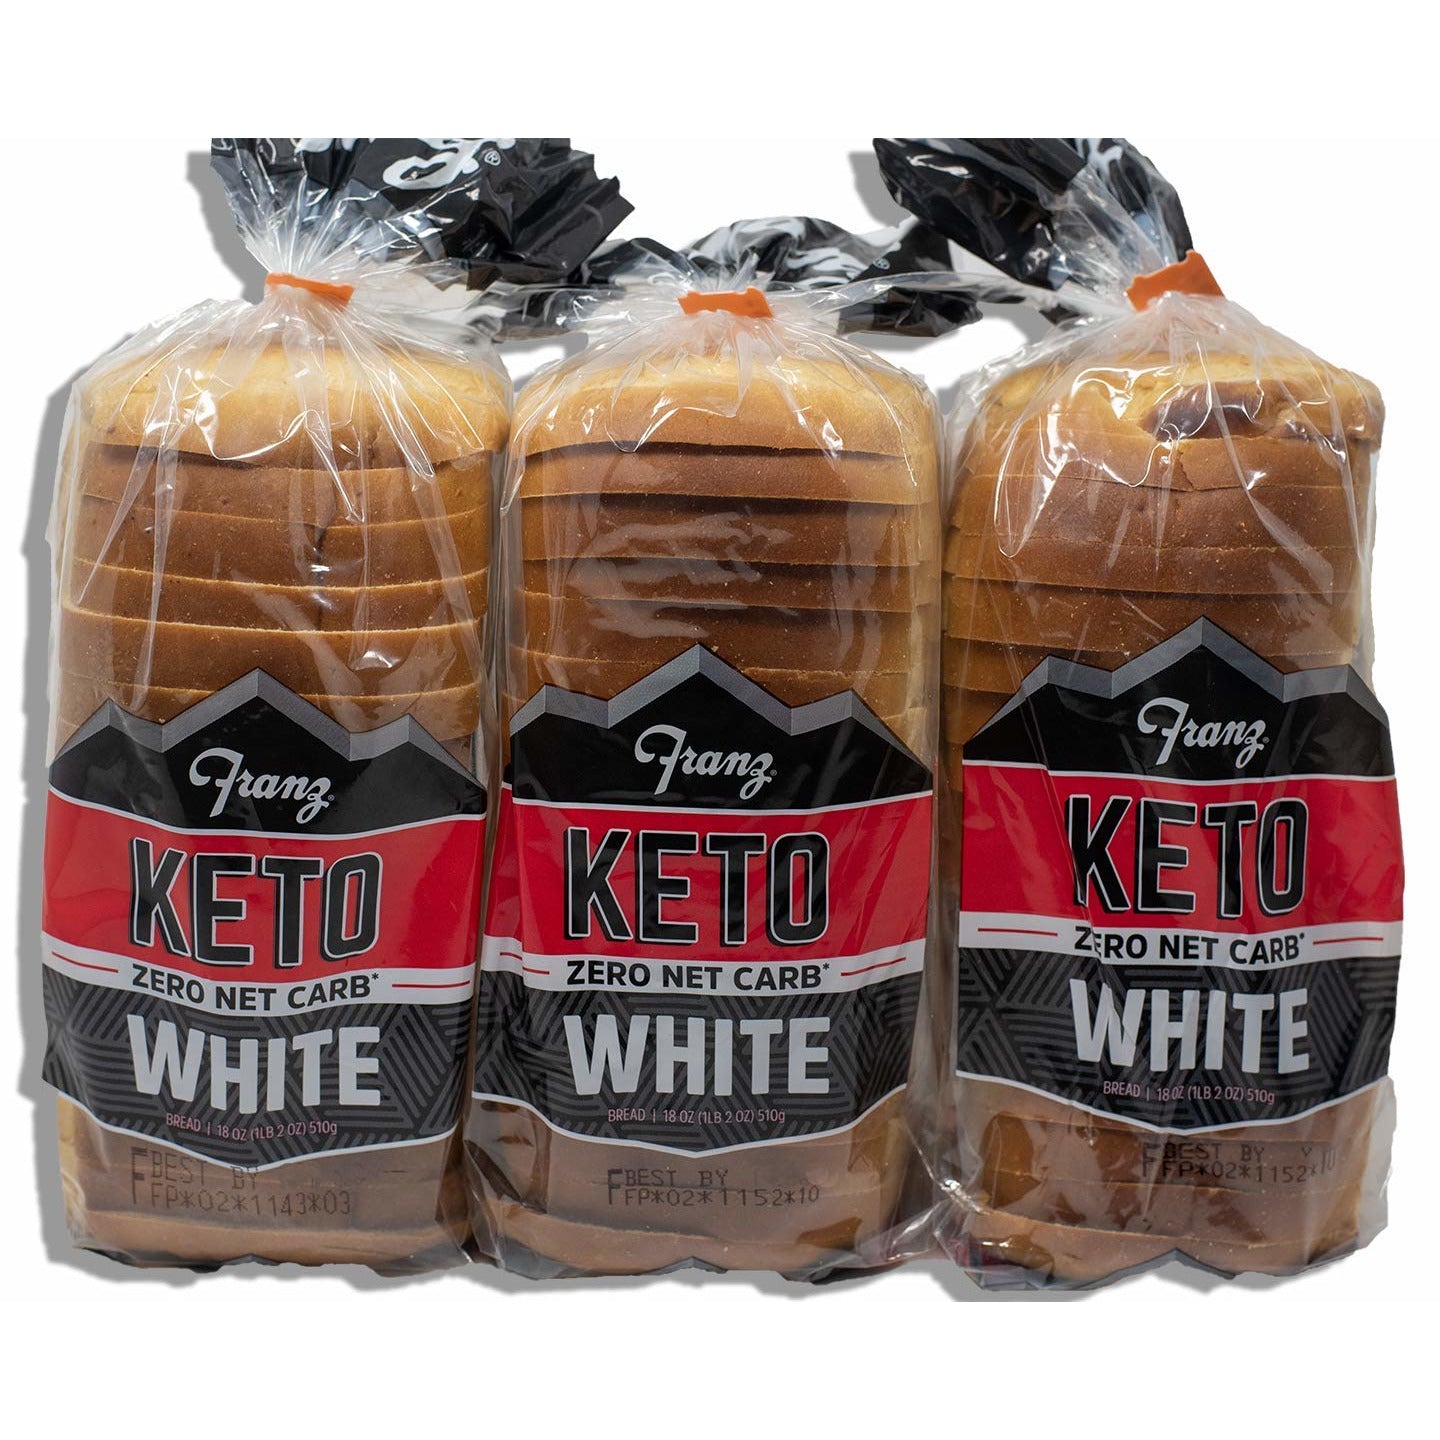 Keto Bread, 0 Net Carbs Per Serving, 3 Loaves for your Keto Diet